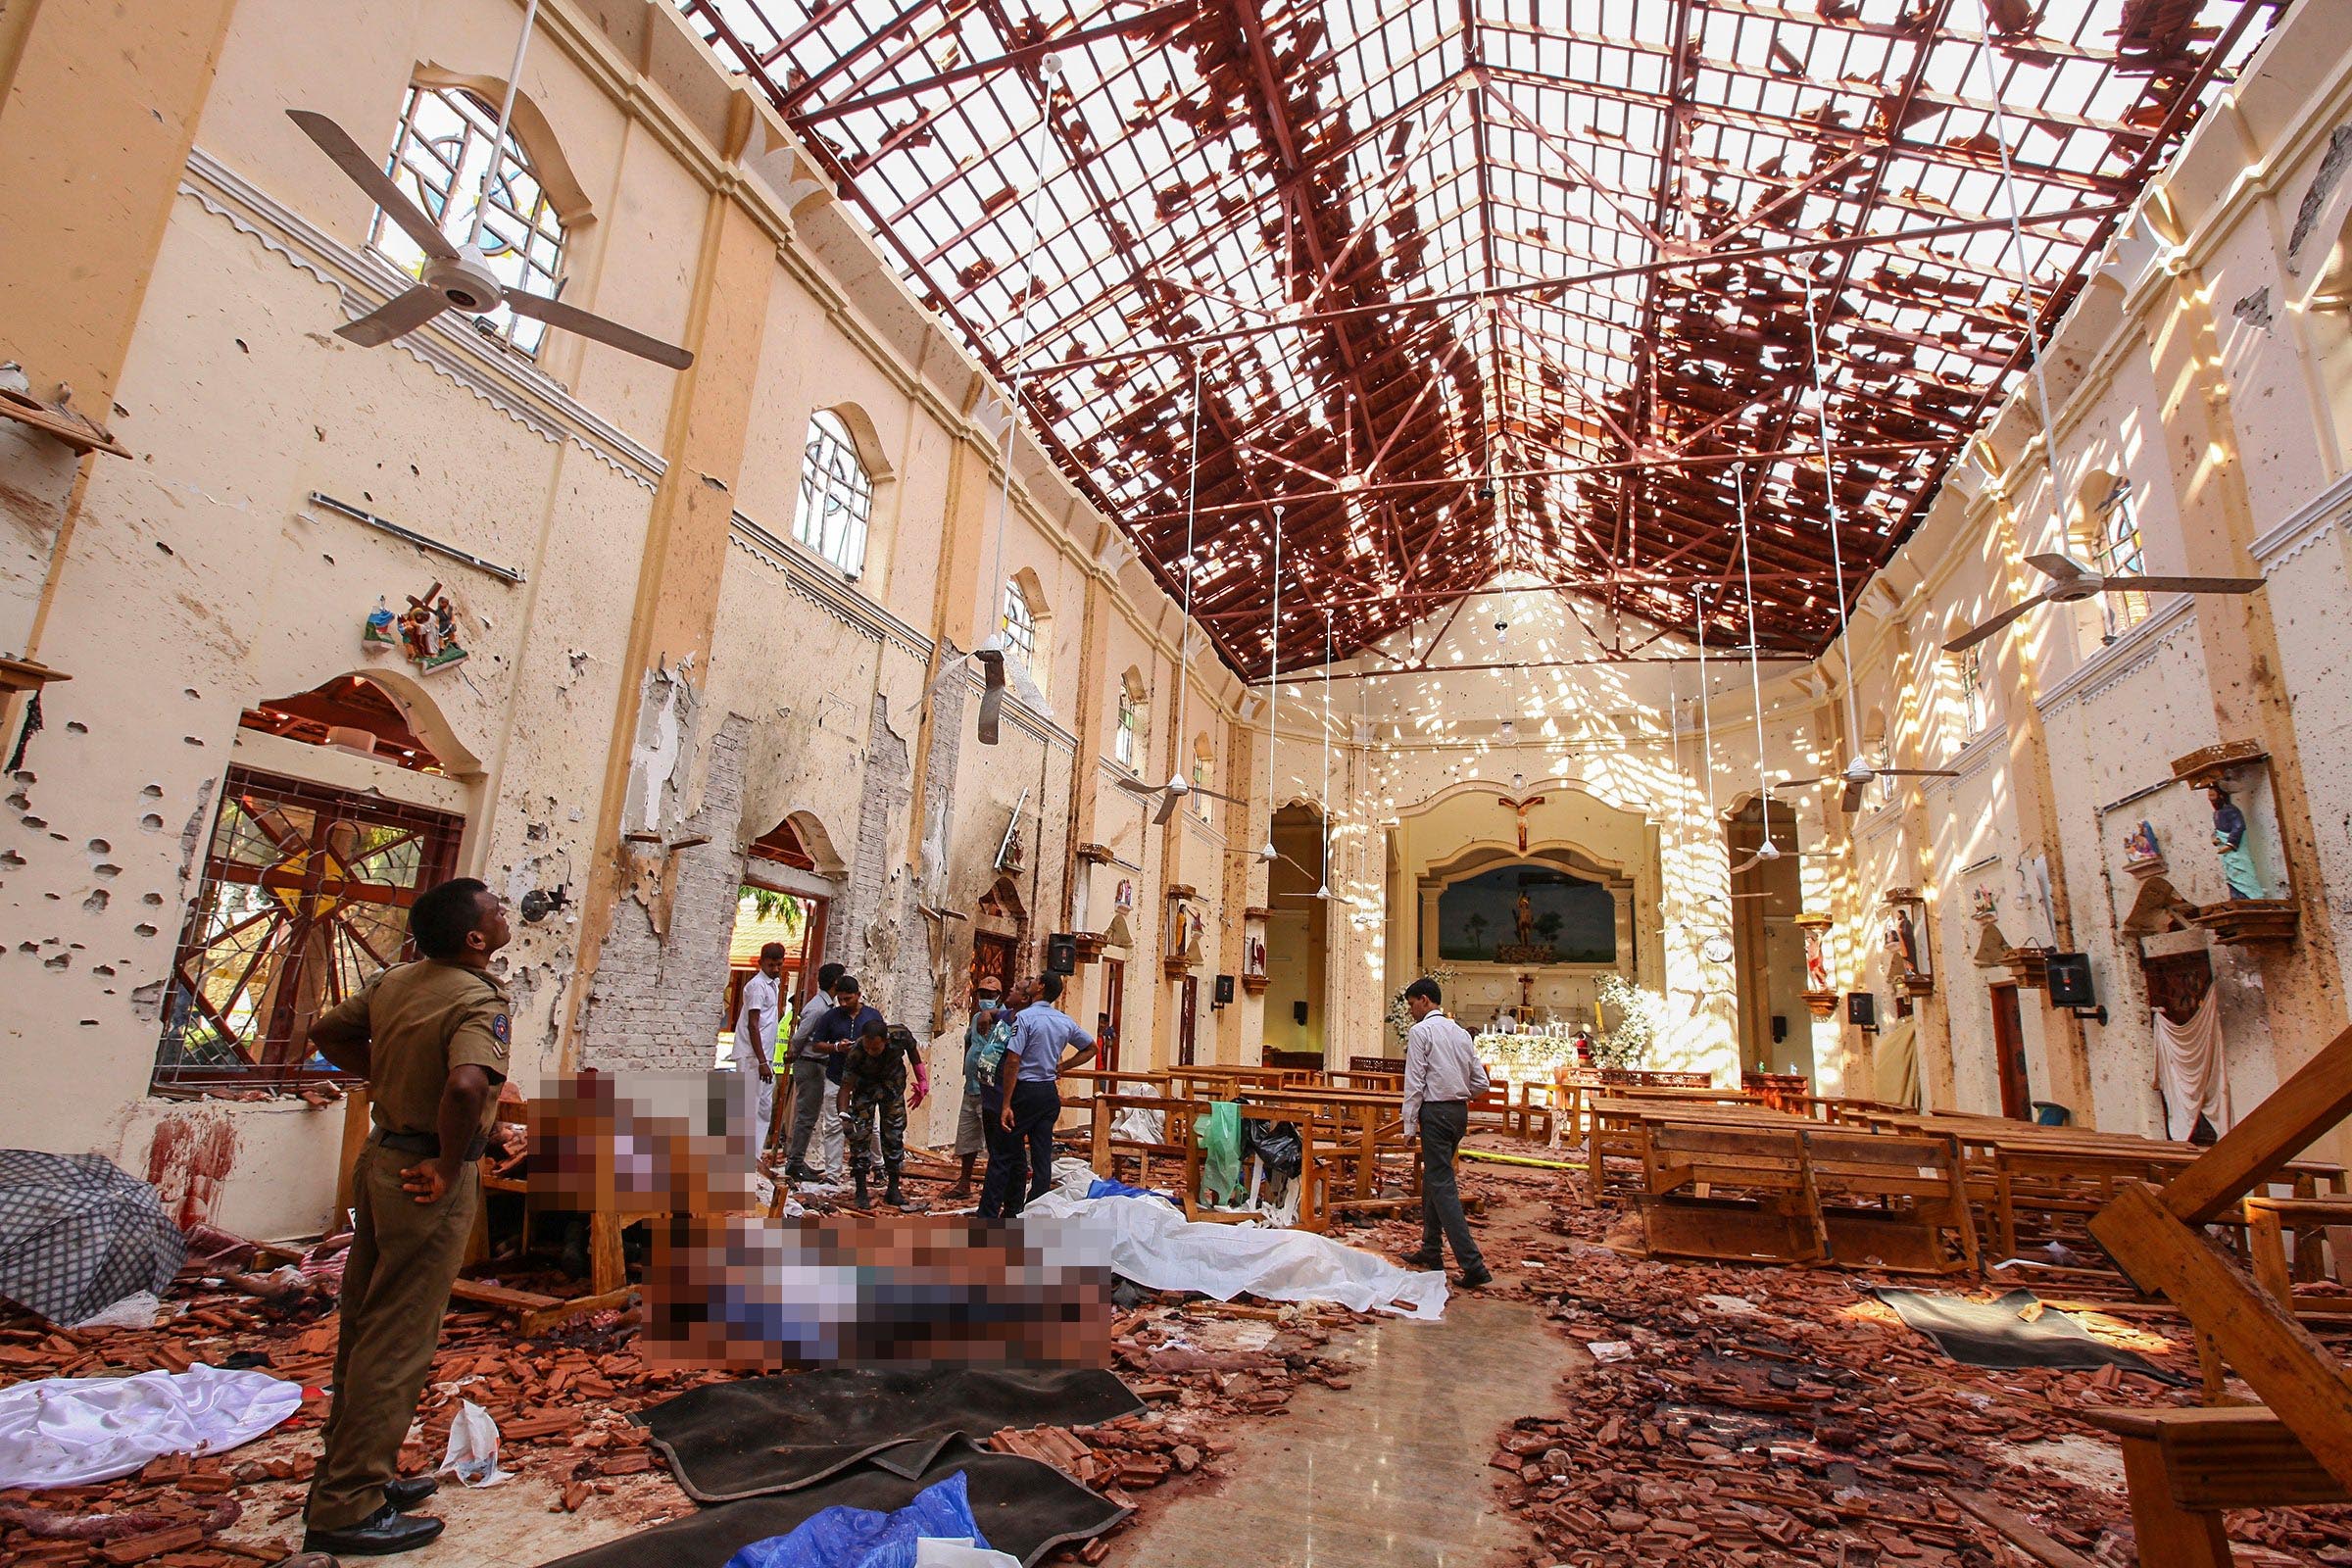 Victims of the Easter suicide bombings lie inside St Sebastian’s Church in Negombo